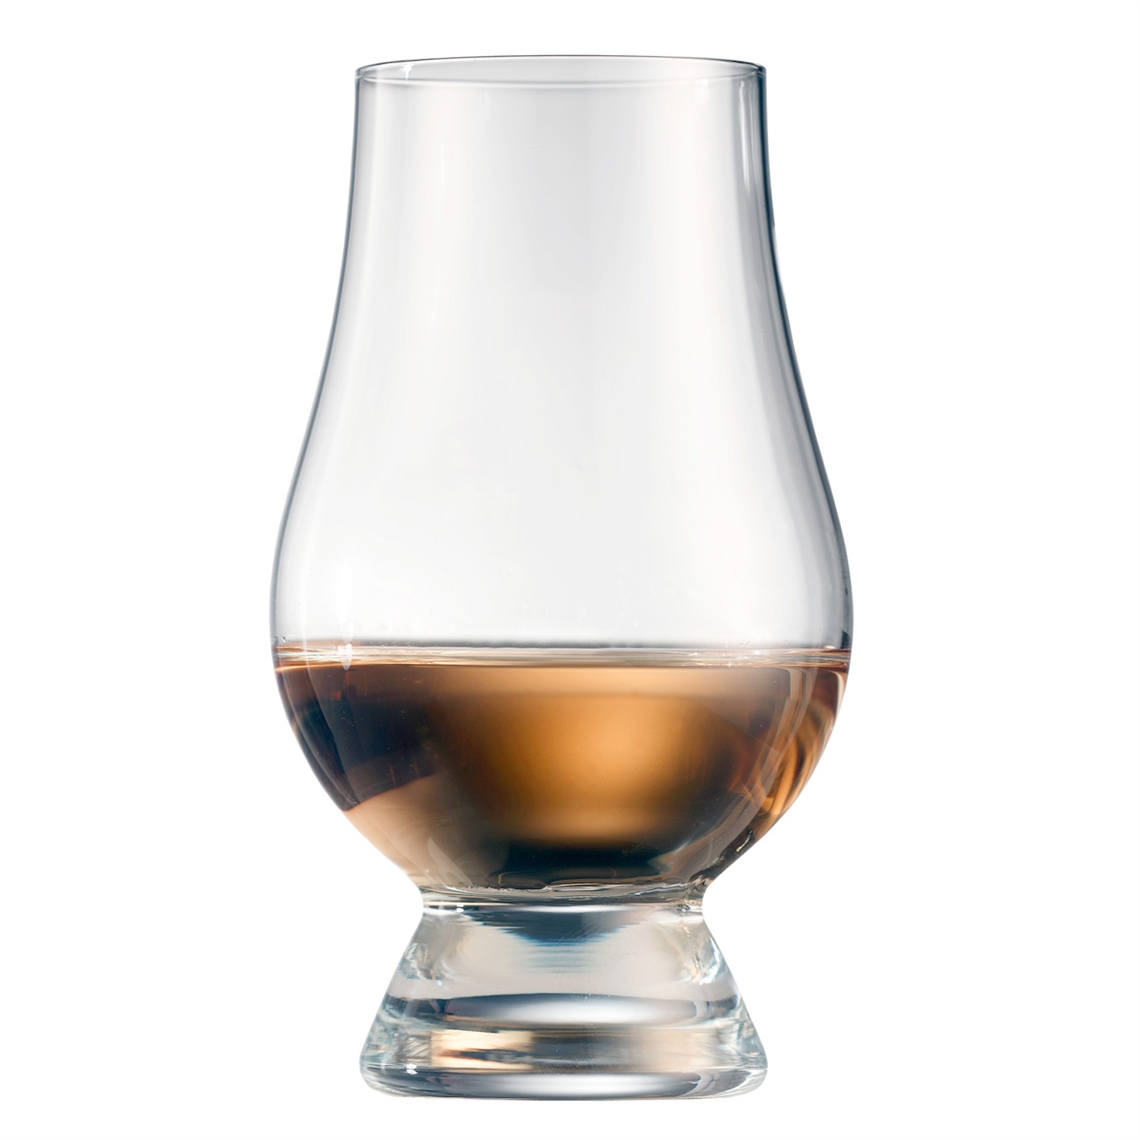 View more restaurant & trade glasses from our Whisky Glasses range